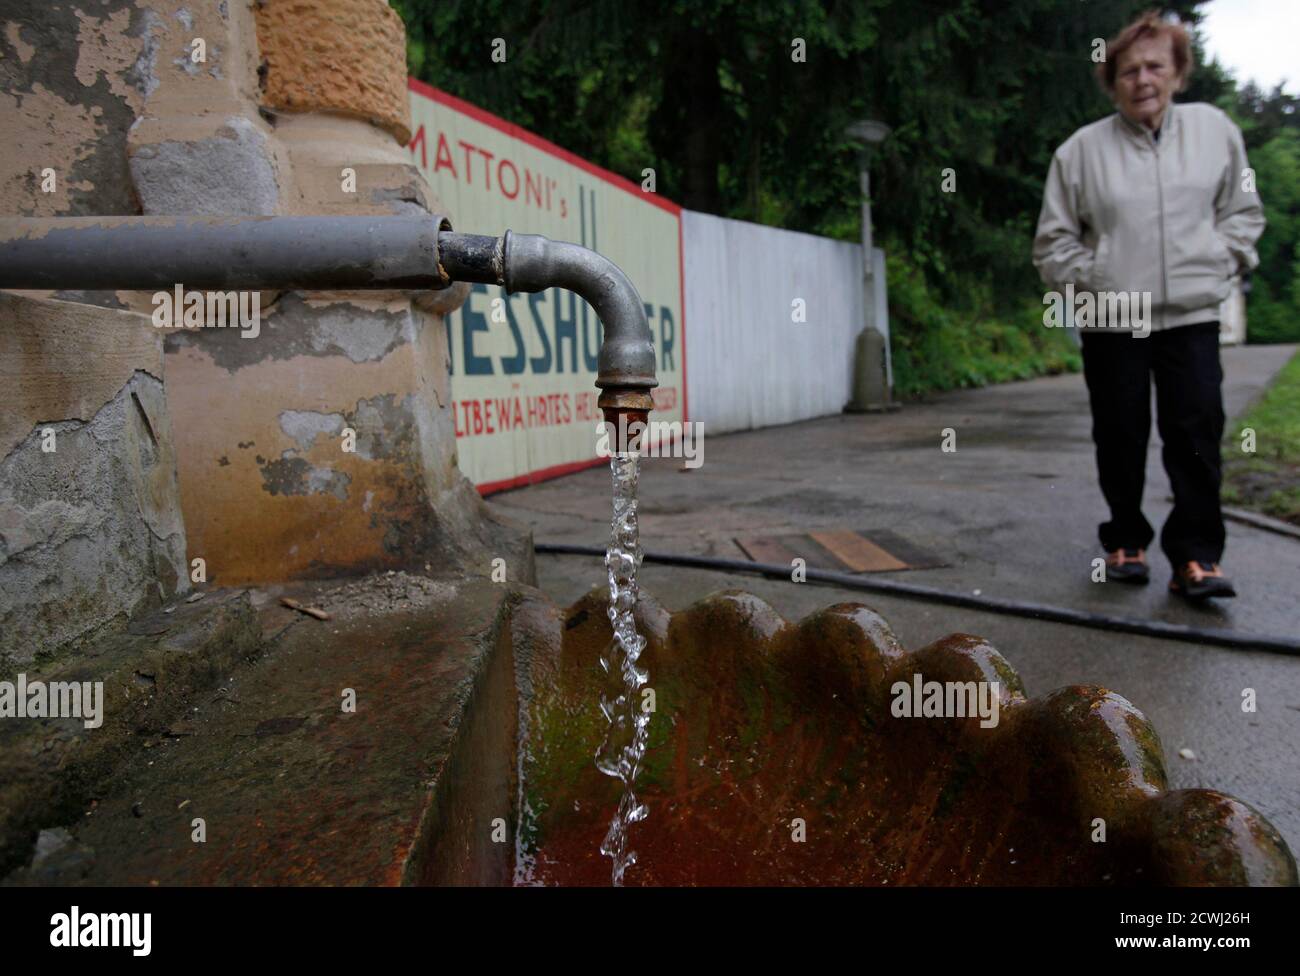 A woman walks past Otto's spring inside the former Spa Kyselka, near Karlovy Vary May 18, 2013. The spa, which was formerly used as public baths, was temporarily closed down after the fall of the Communist regime in 1989. Since 1989, the cultural monument has had several owners who failed to restore it. The spa is now standing on the verge of complete devastation. REUTERS/David W Cerny (CZECH REPUBLIC - Tags: SOCIETY TRAVEL) Stock Photo